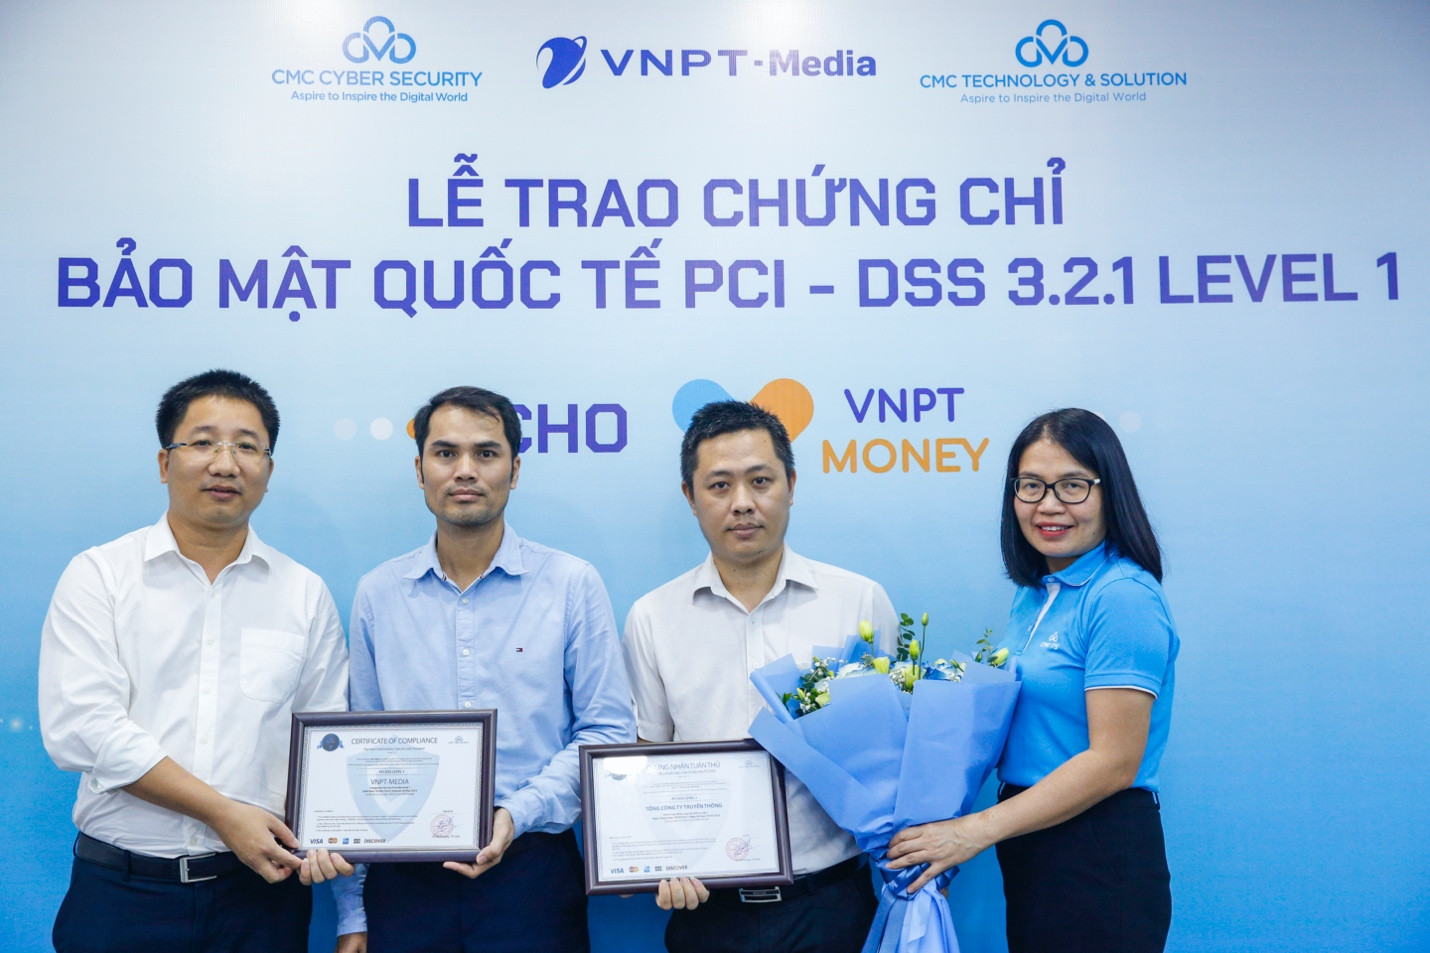 VNPT Money received the highest level PCI-DSS security certificate